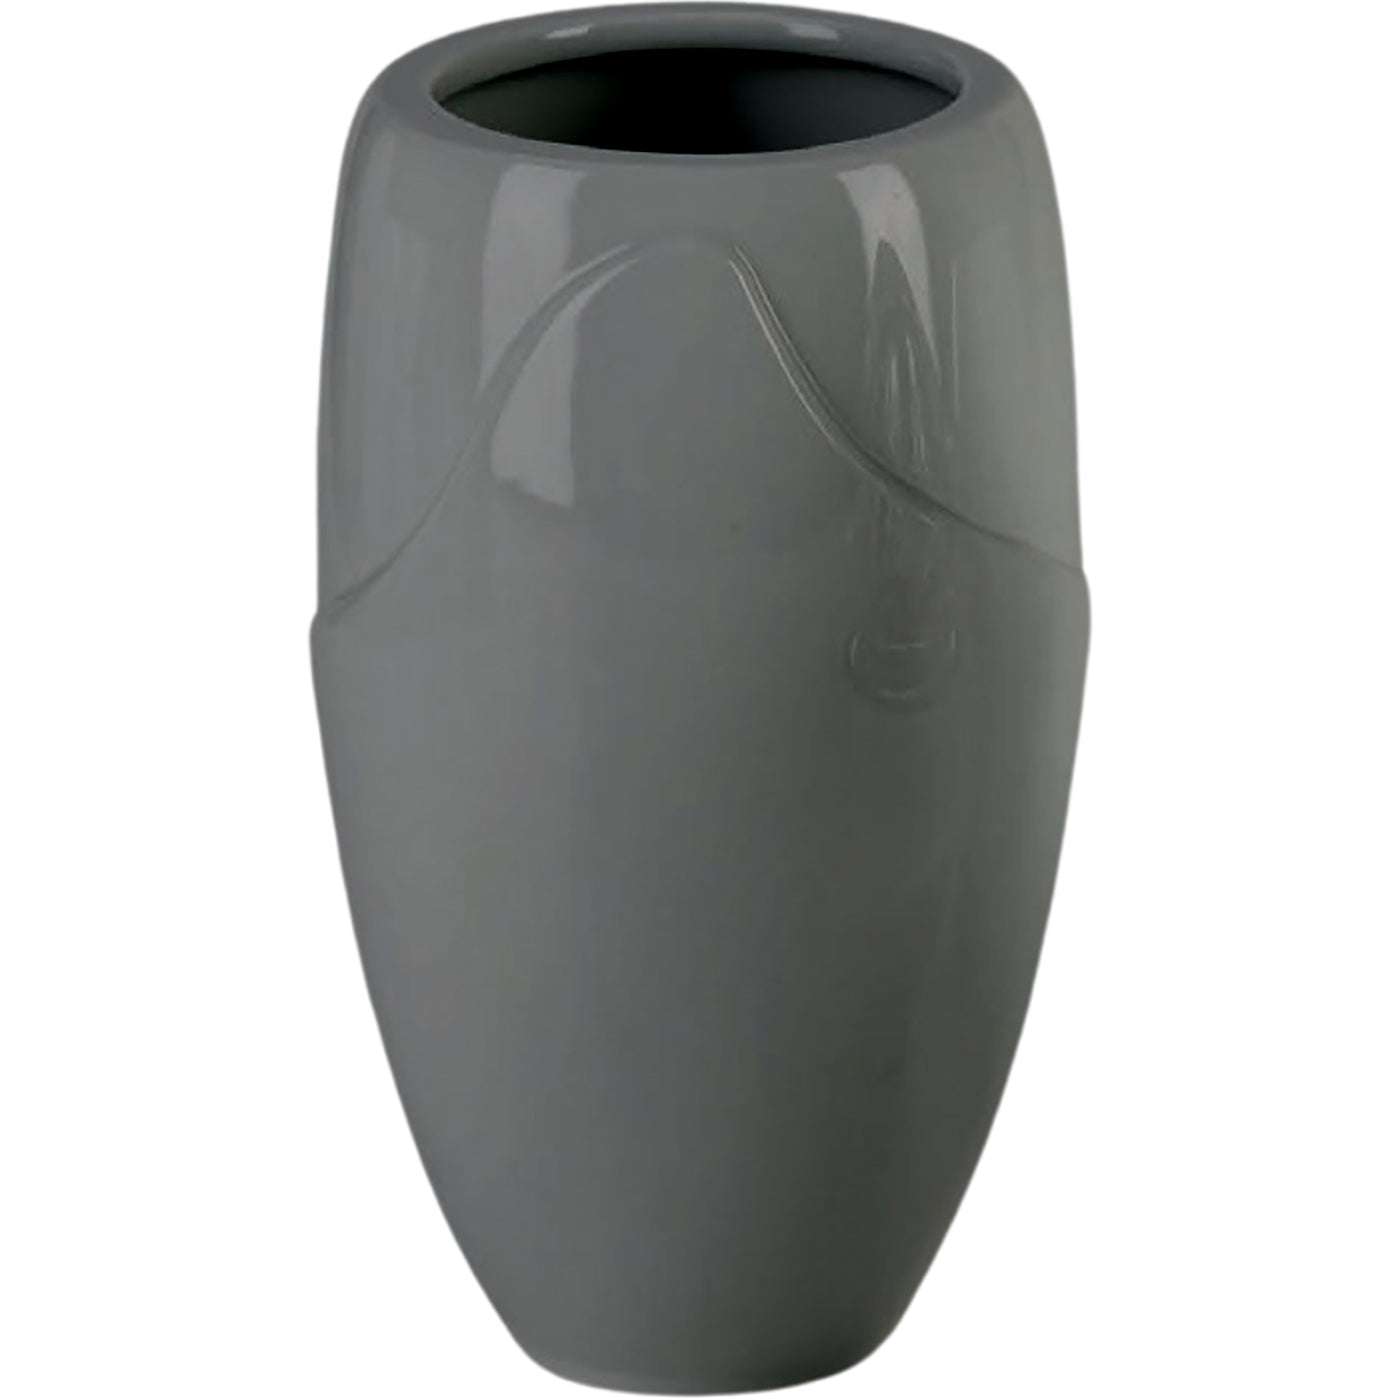 Grave vase Onda gray 21x13cm - 8.3x5.1in In gray porcelain, ground attached ON168P/G